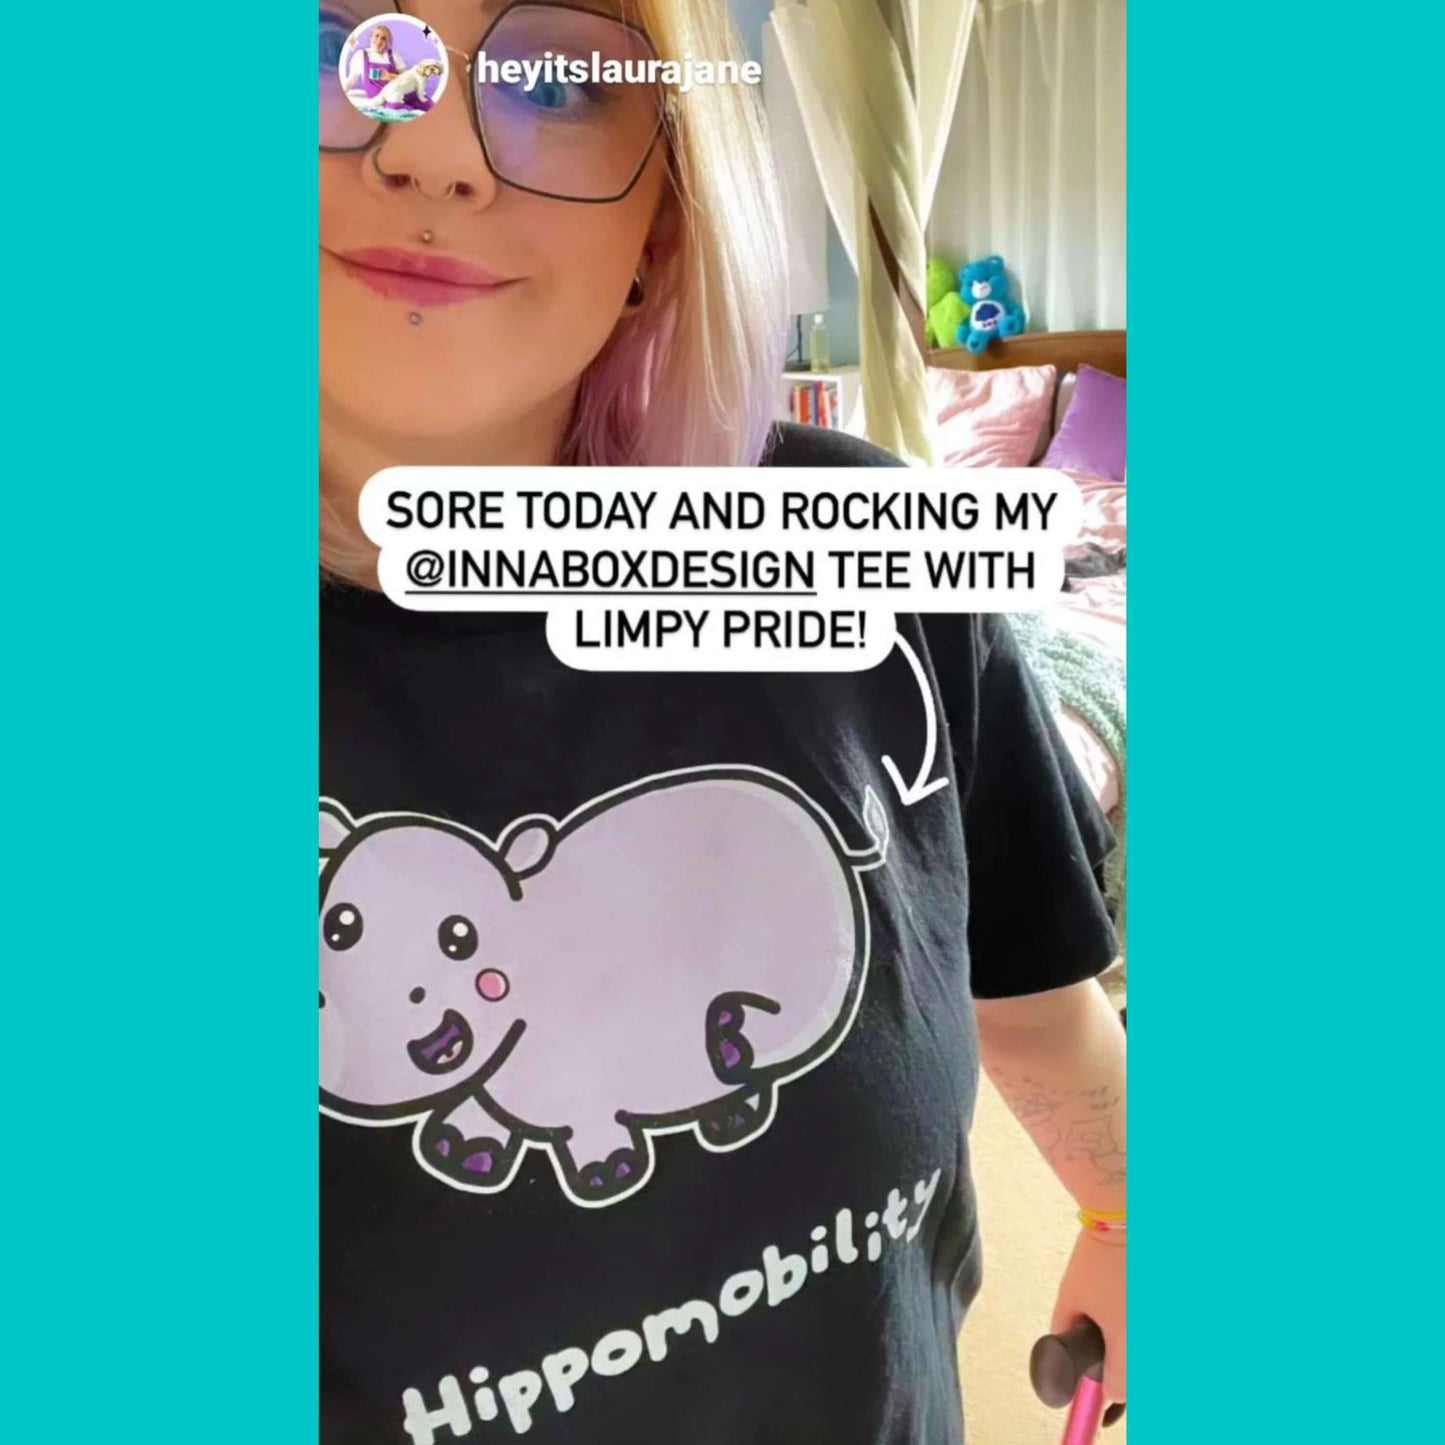 Femme person wearing Hippomobility Tee - Hyper Mobility Tee screenshot taken from instagram user @heyitslaurajane. The black t-shirt has an illustration of a pink happy hippo with 'hippomobility' in white text underneath. The hand drawn design is made to raise awareness for hyper mobility.